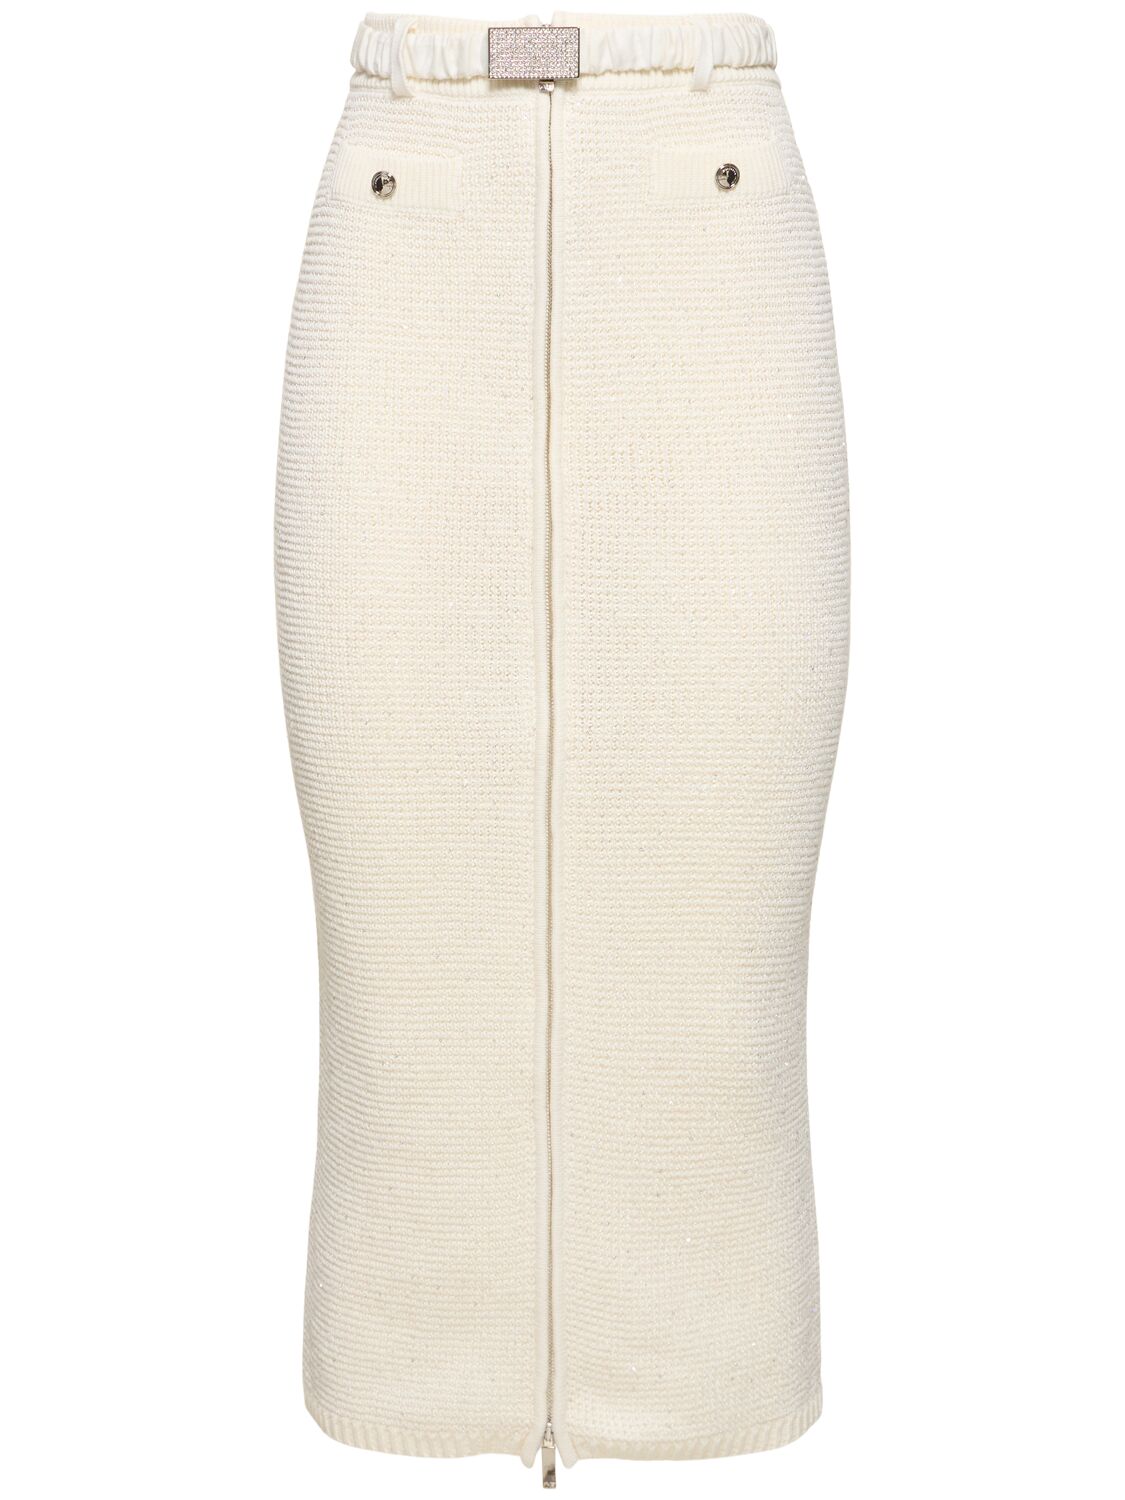 Alessandra Rich Sequined Cotton Blend Knit Midi Skirt In White